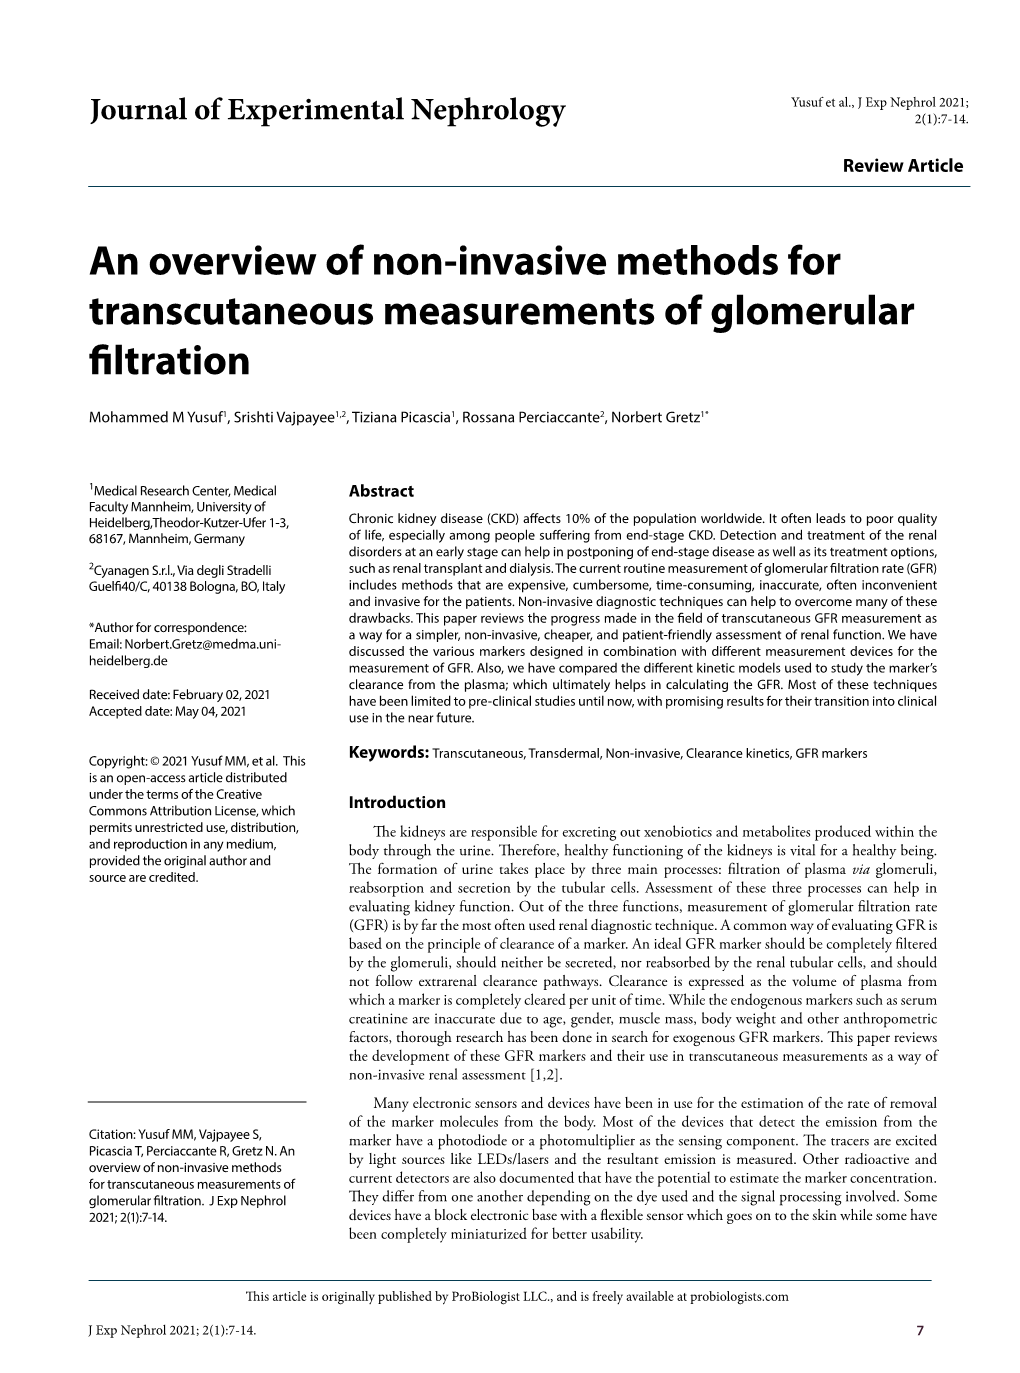 An Overview of Non-Invasive Methods for Transcutaneous Measurements of Glomerular Filtration